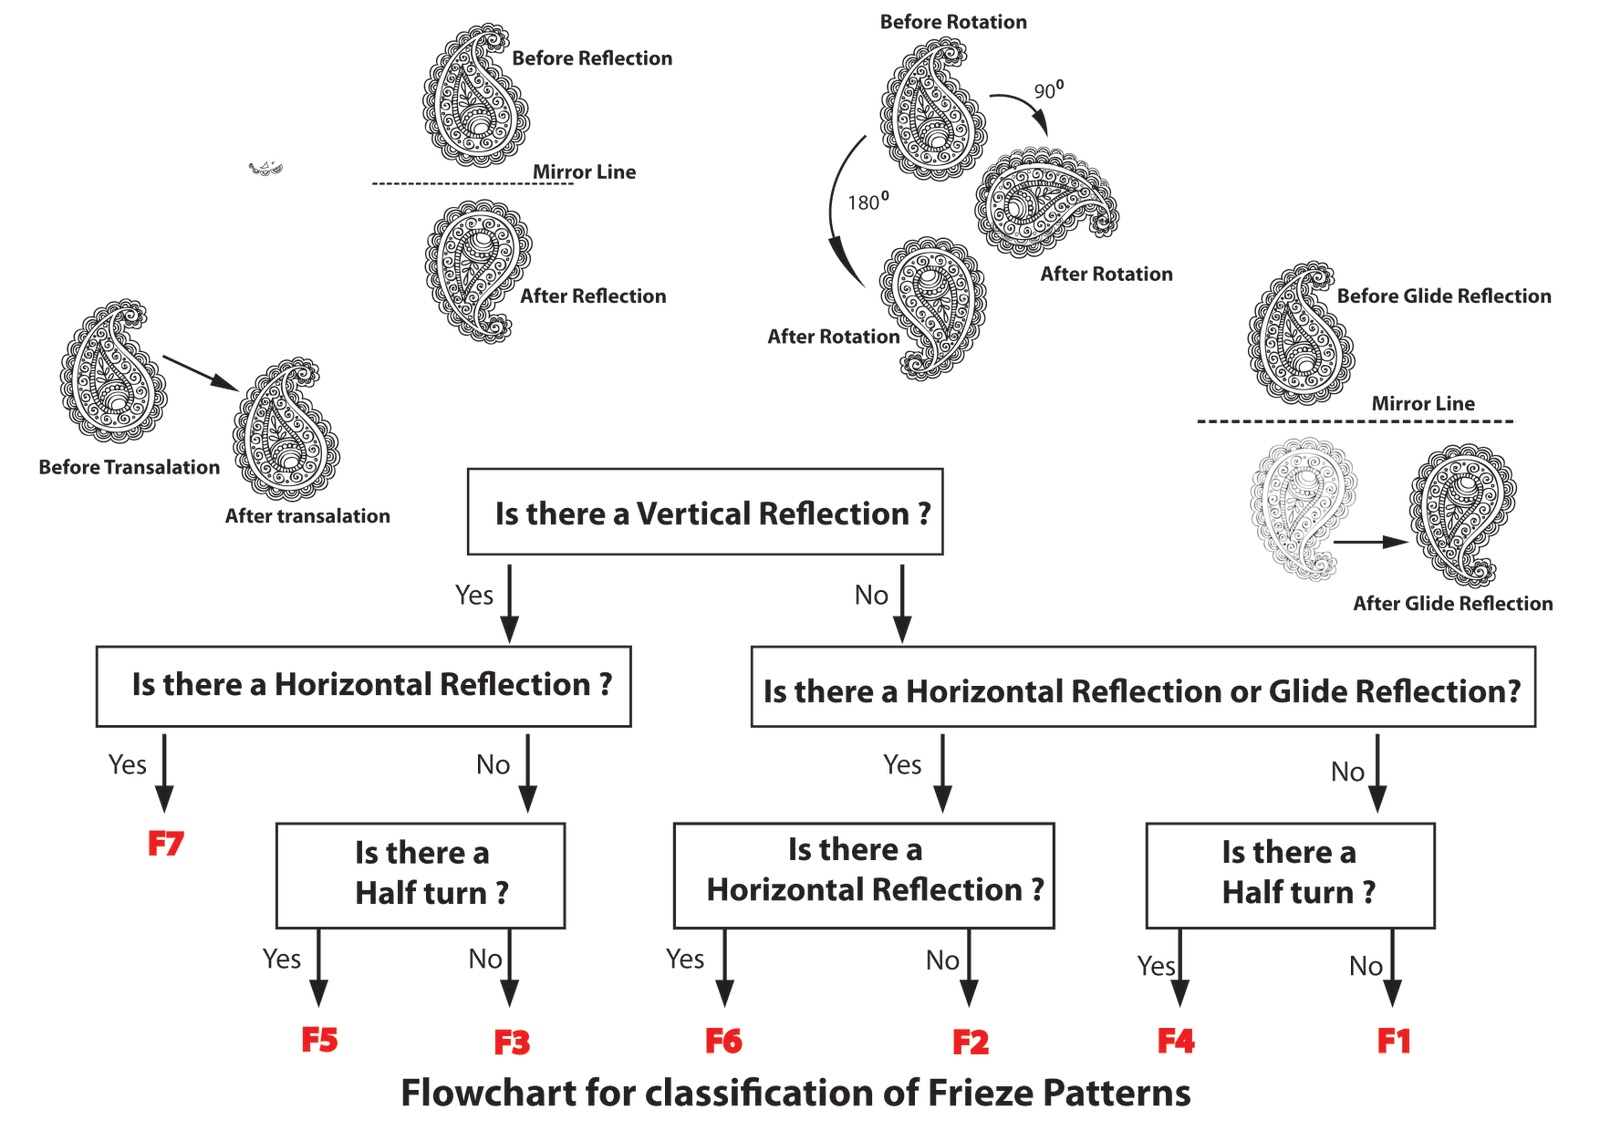 Using The Flowchart Can You Classify Various Patterns Given In Fig